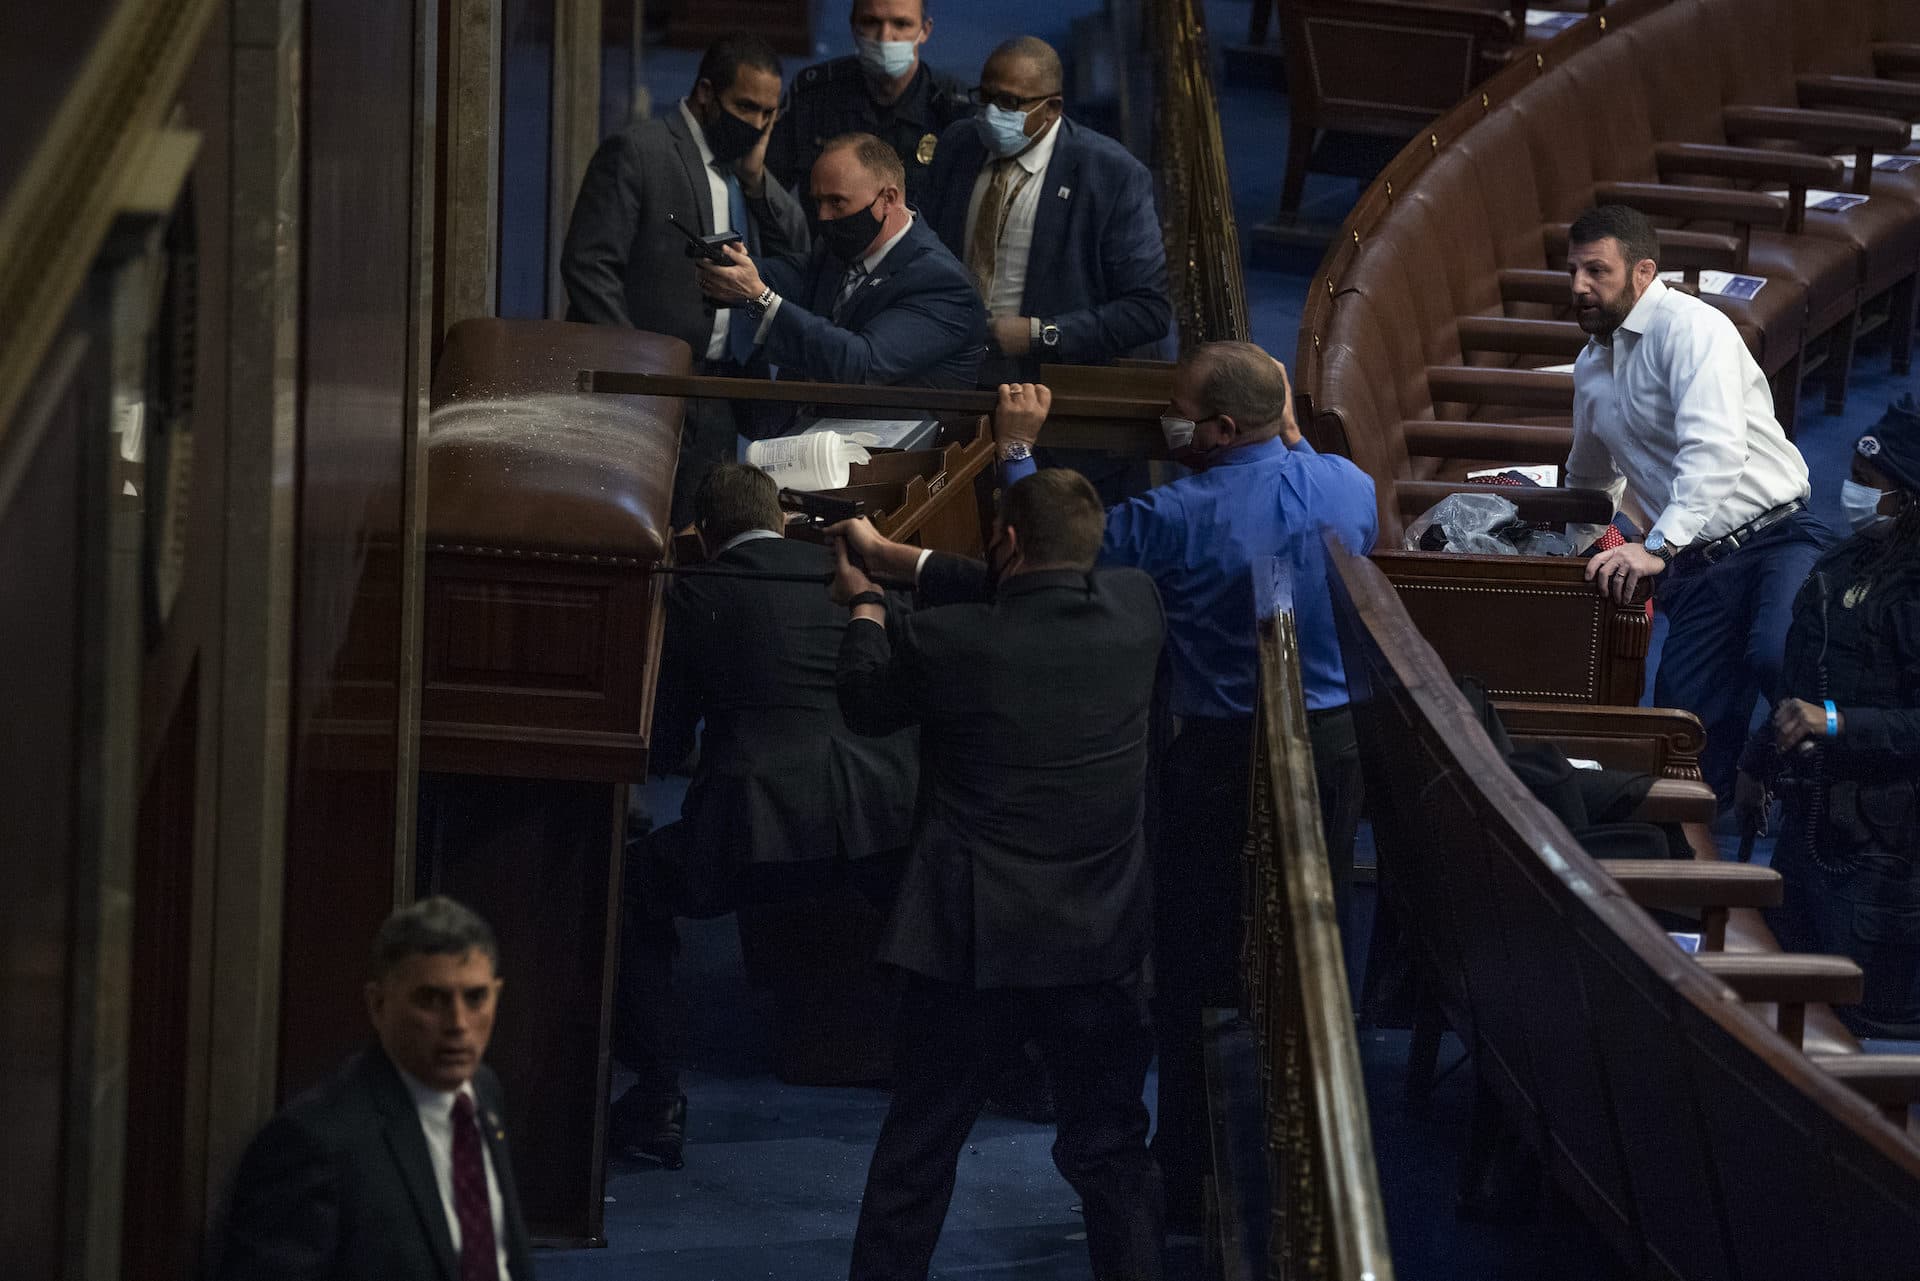 Security barricades the door of the House chamber as protesters try to break in to the joint session of Congress certifying the Electoral College vote on Wednesday. (Tom Williams/CQ-Roll Call, Inc via Getty Images)